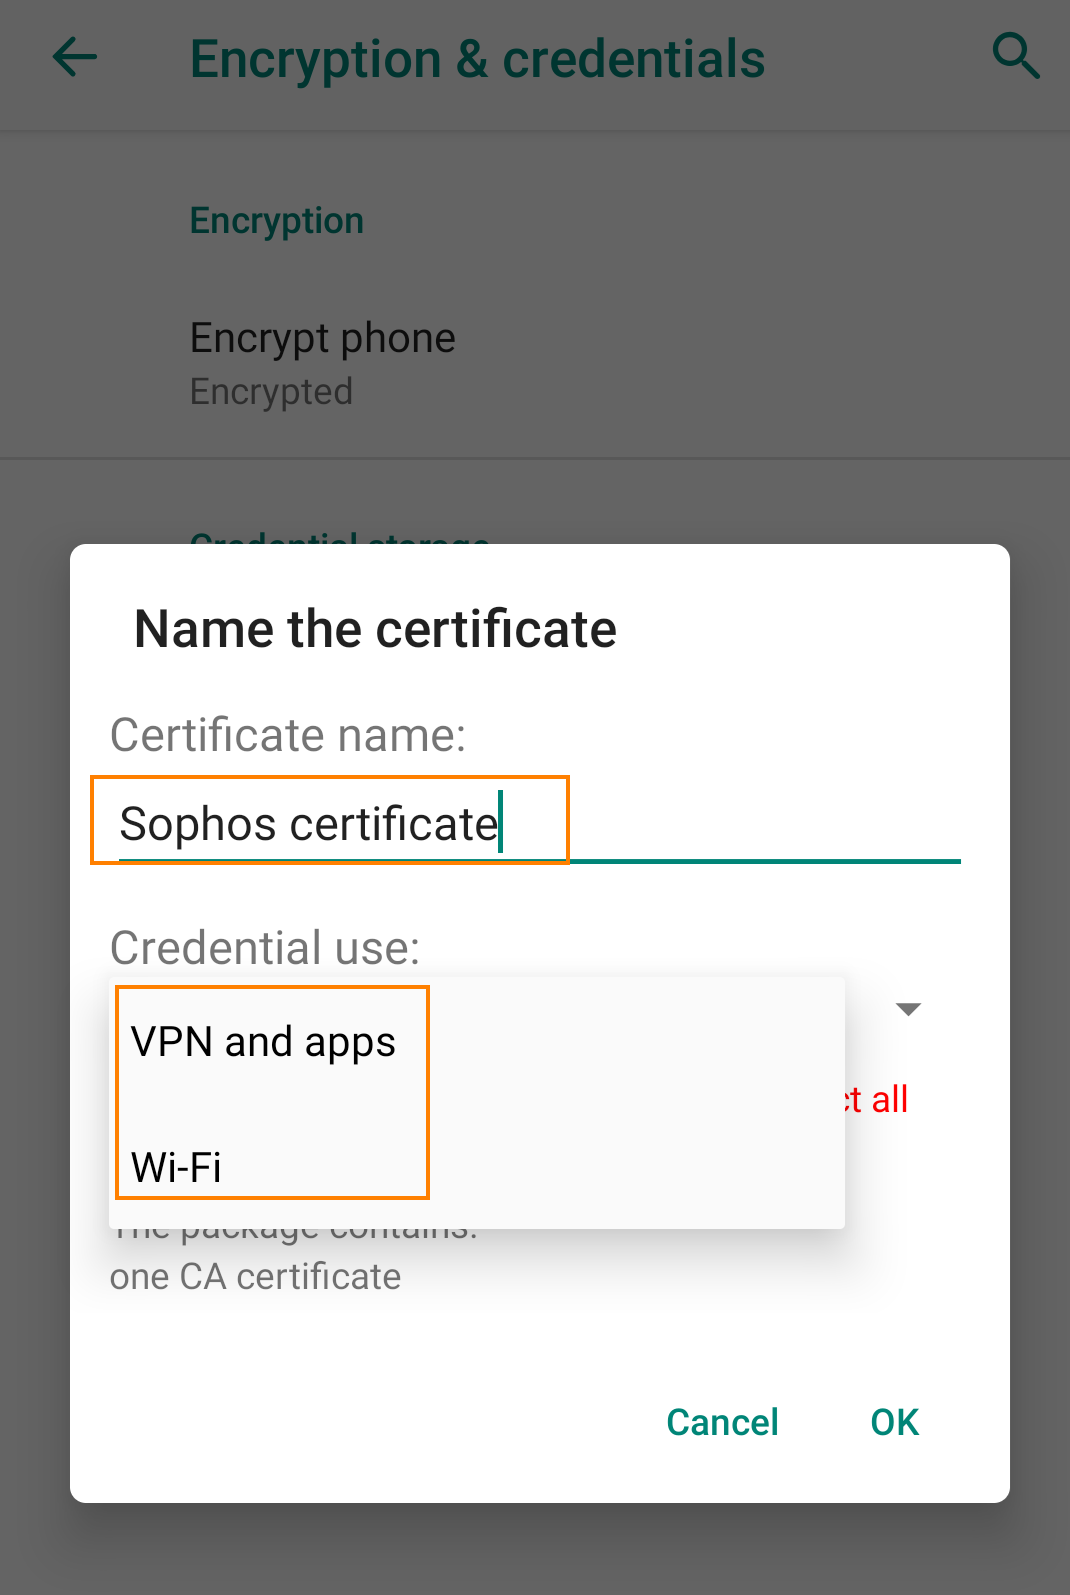 Enter the certificate name.